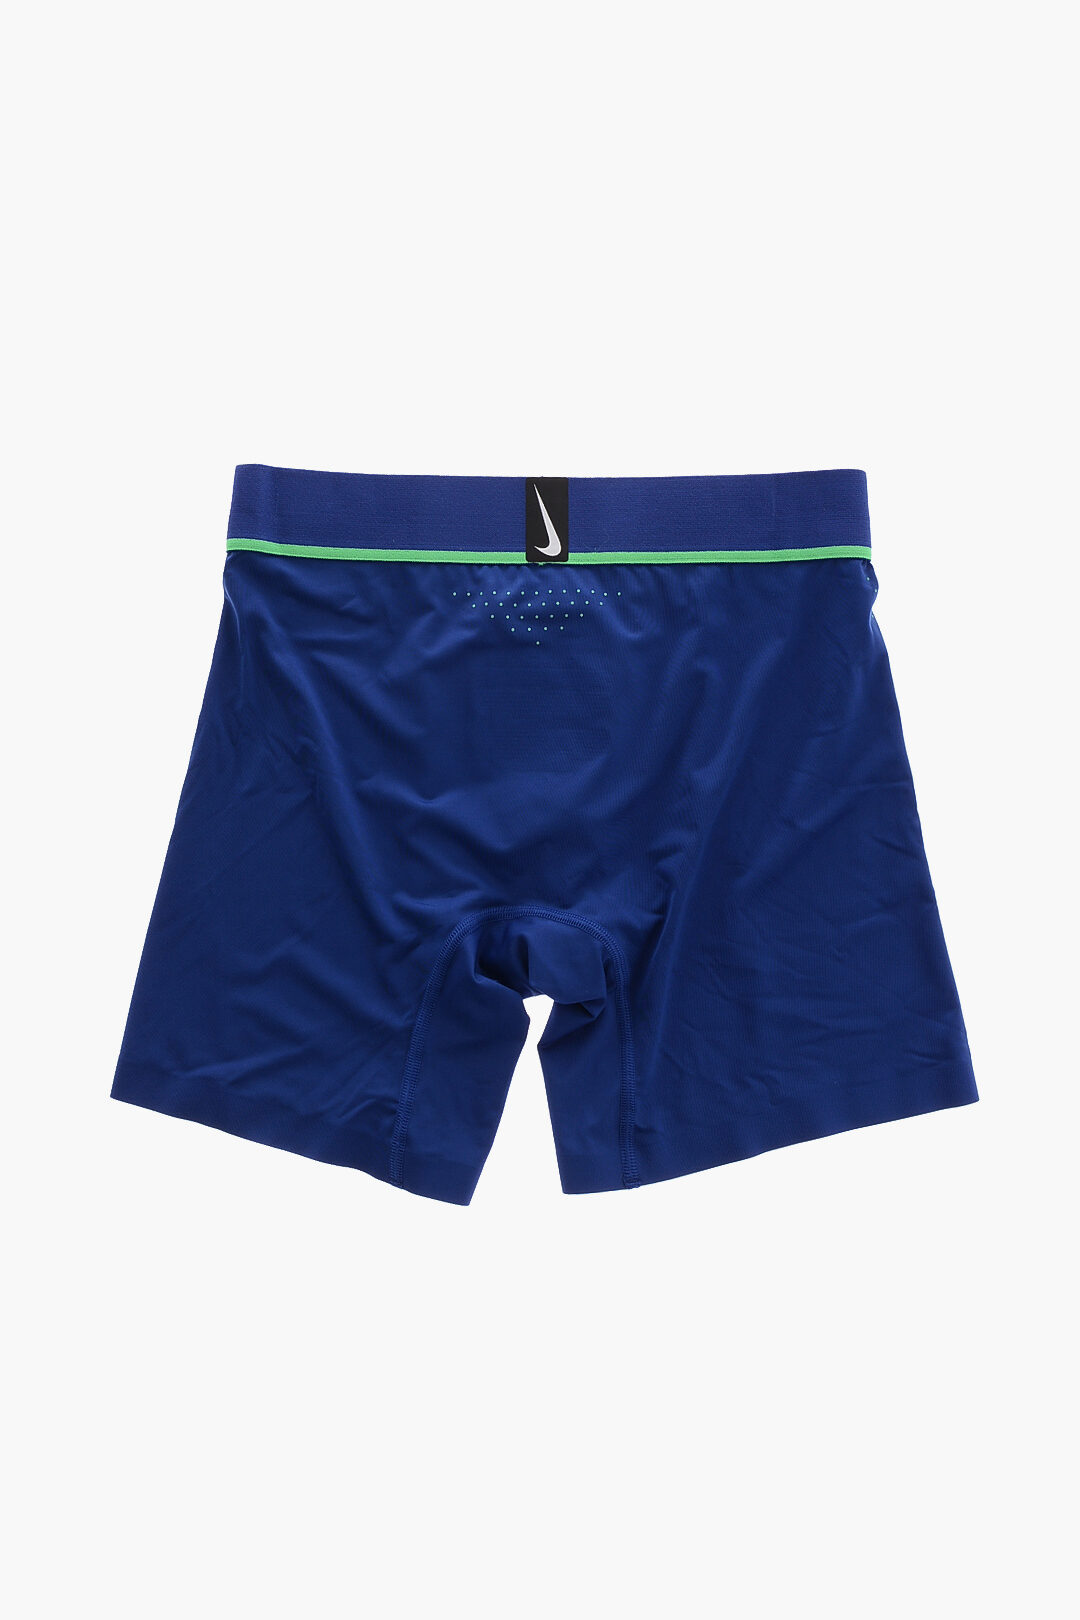 Nike Dri-Fit Boxer with Logoed Elastic Band men - Glamood Outlet